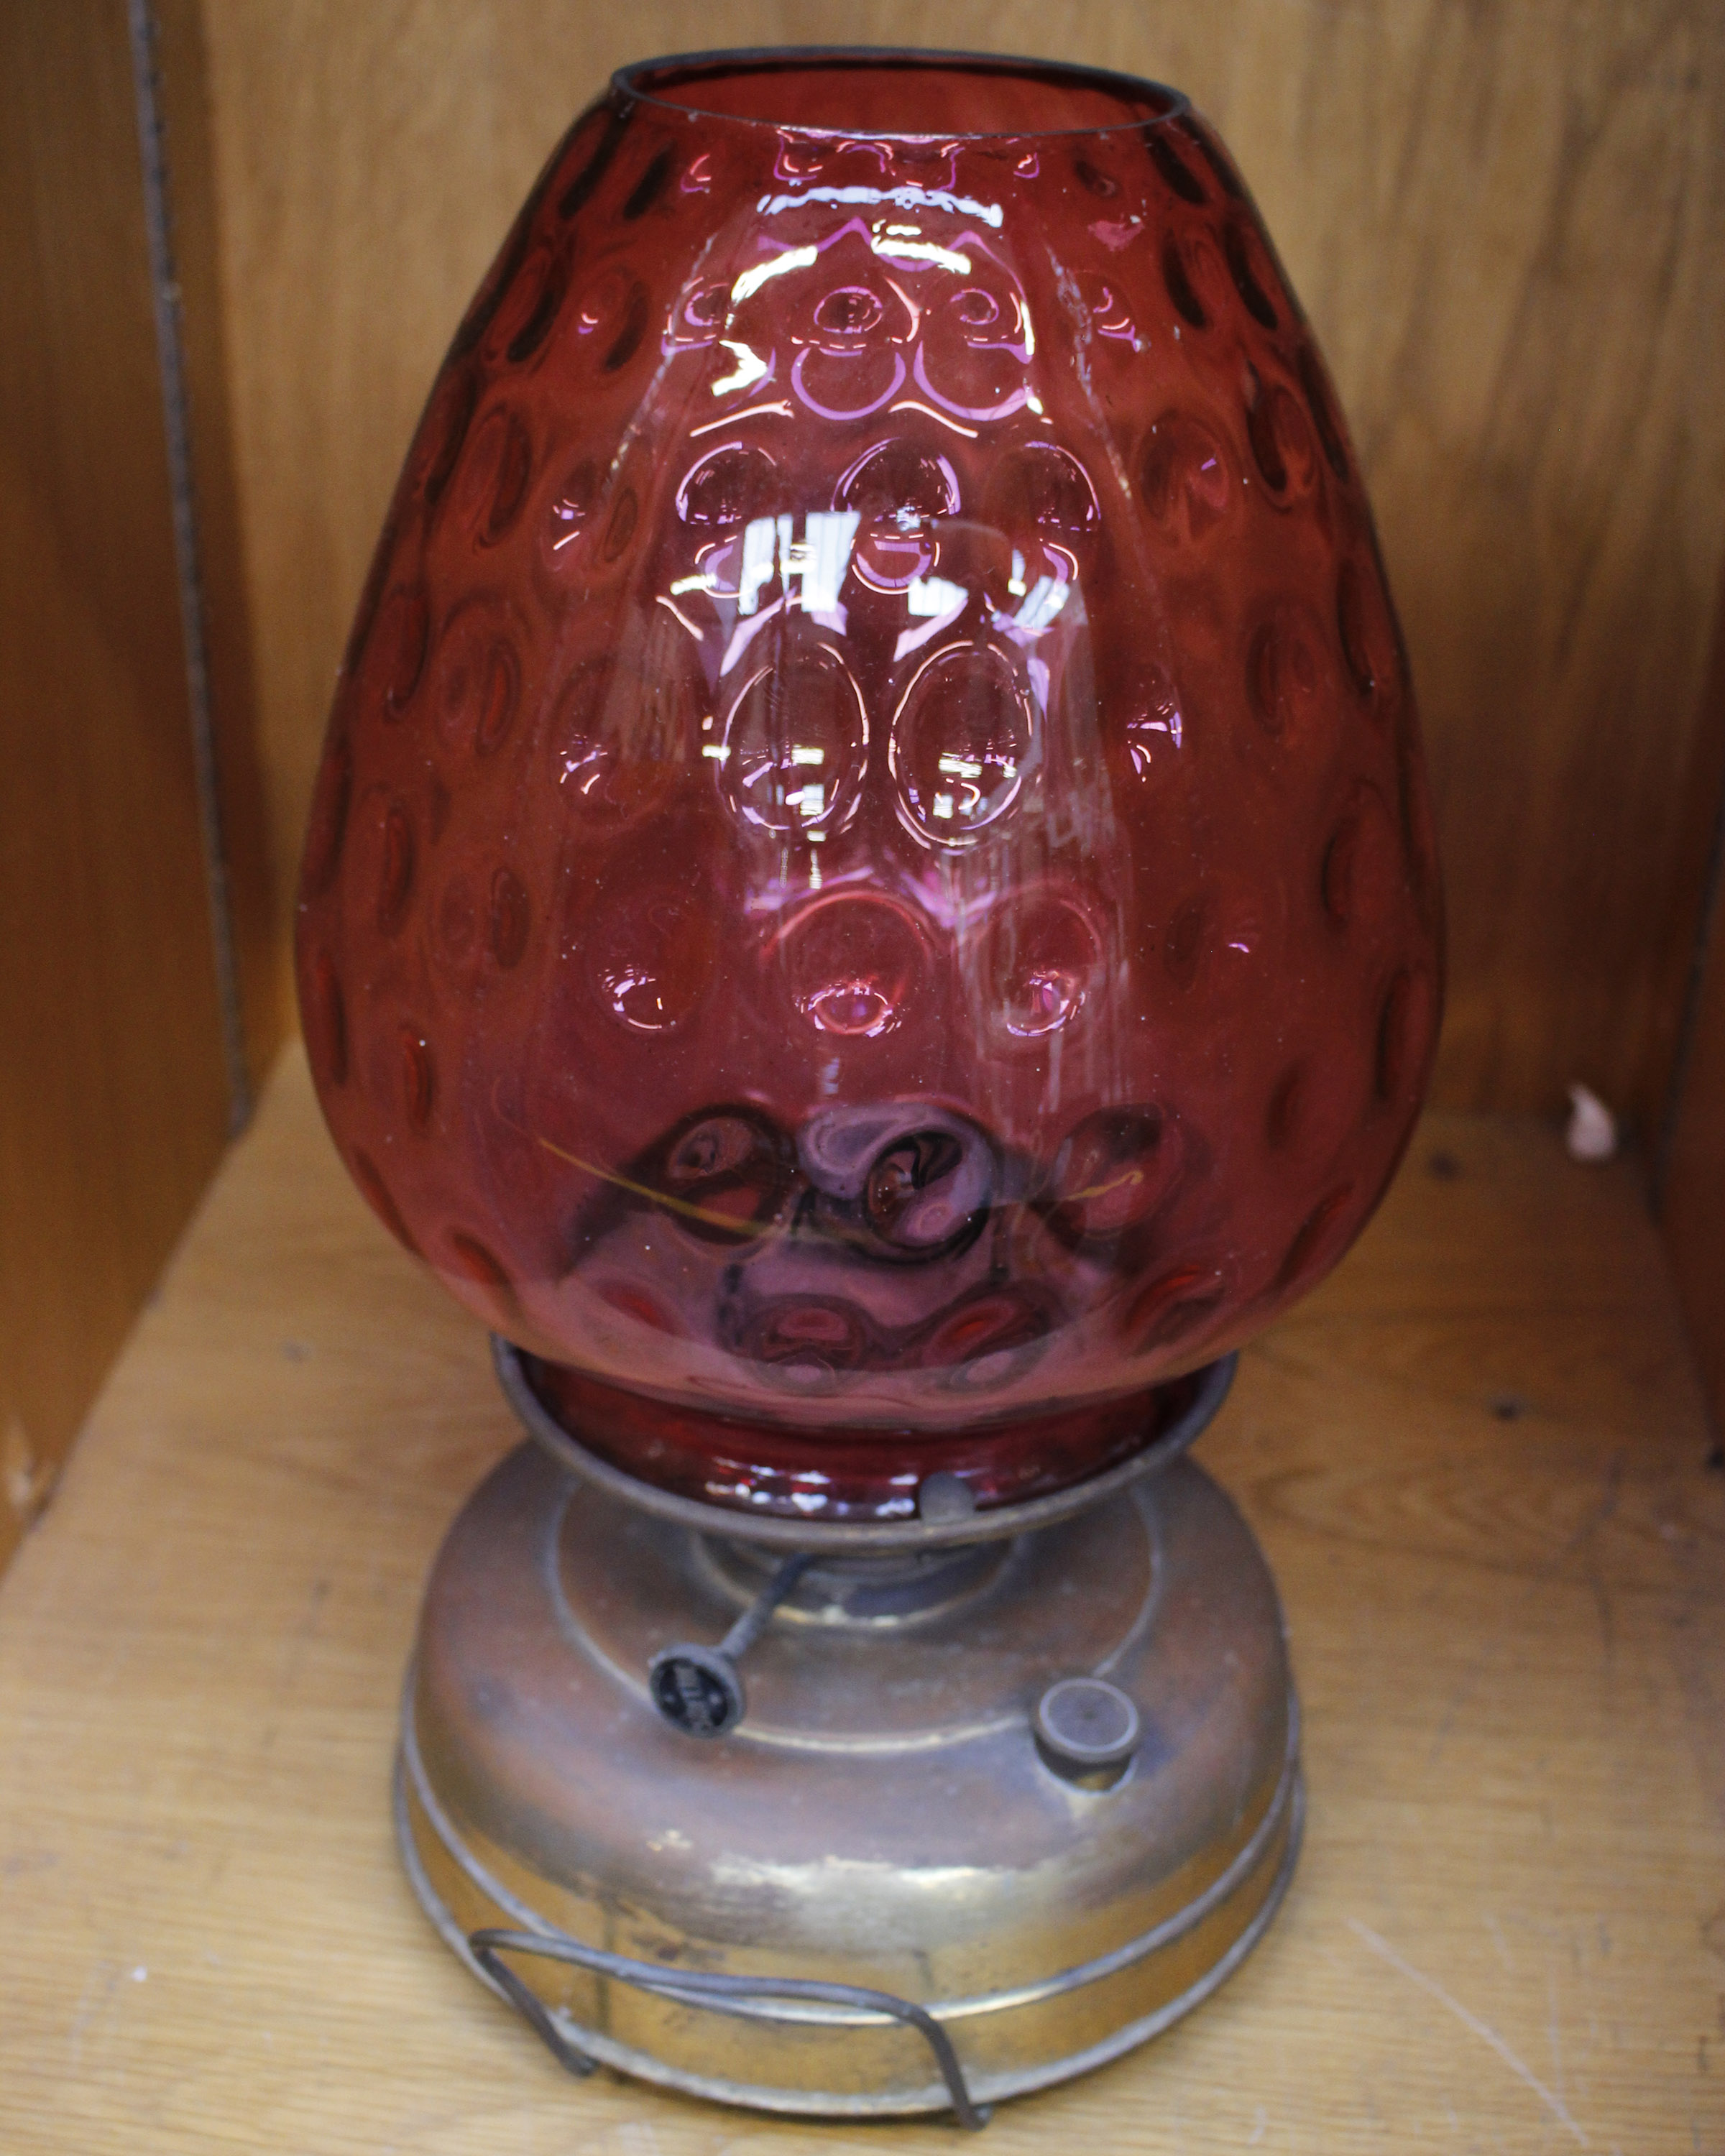 An Antique Metal Based Oil Lamp with Cranberry Glass Shade 43 cm high